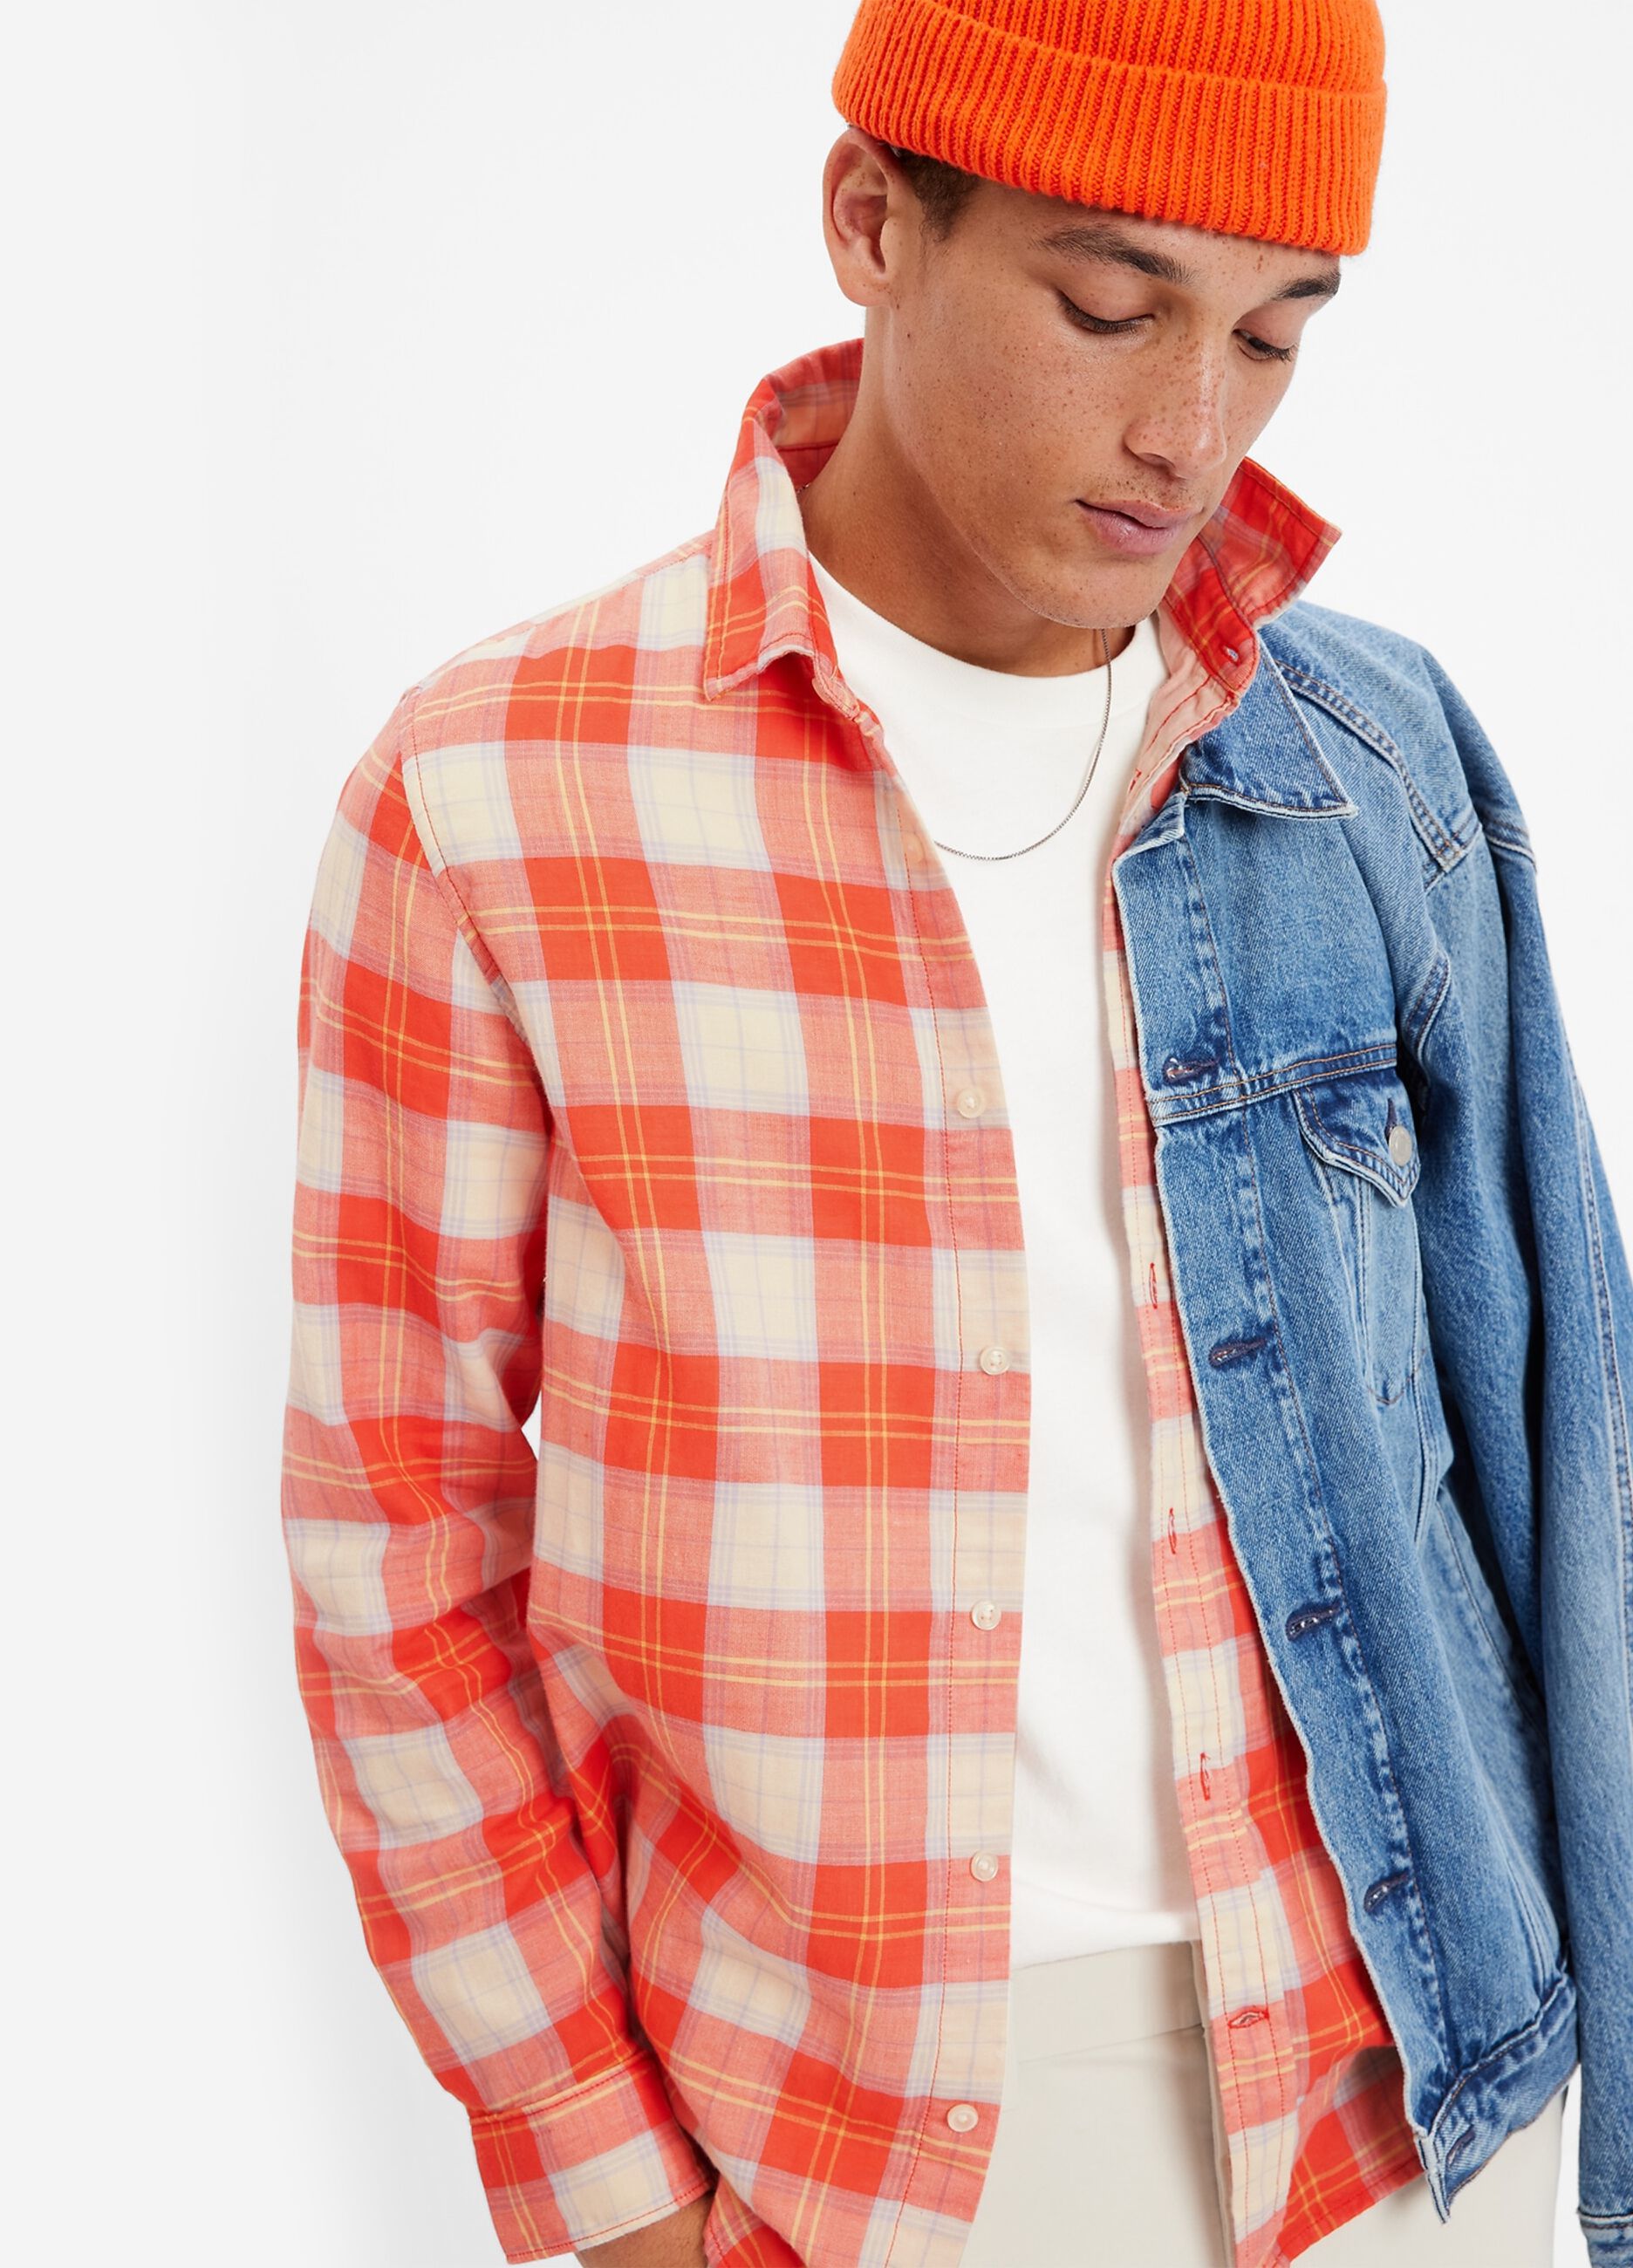 Checked shirt with pocket